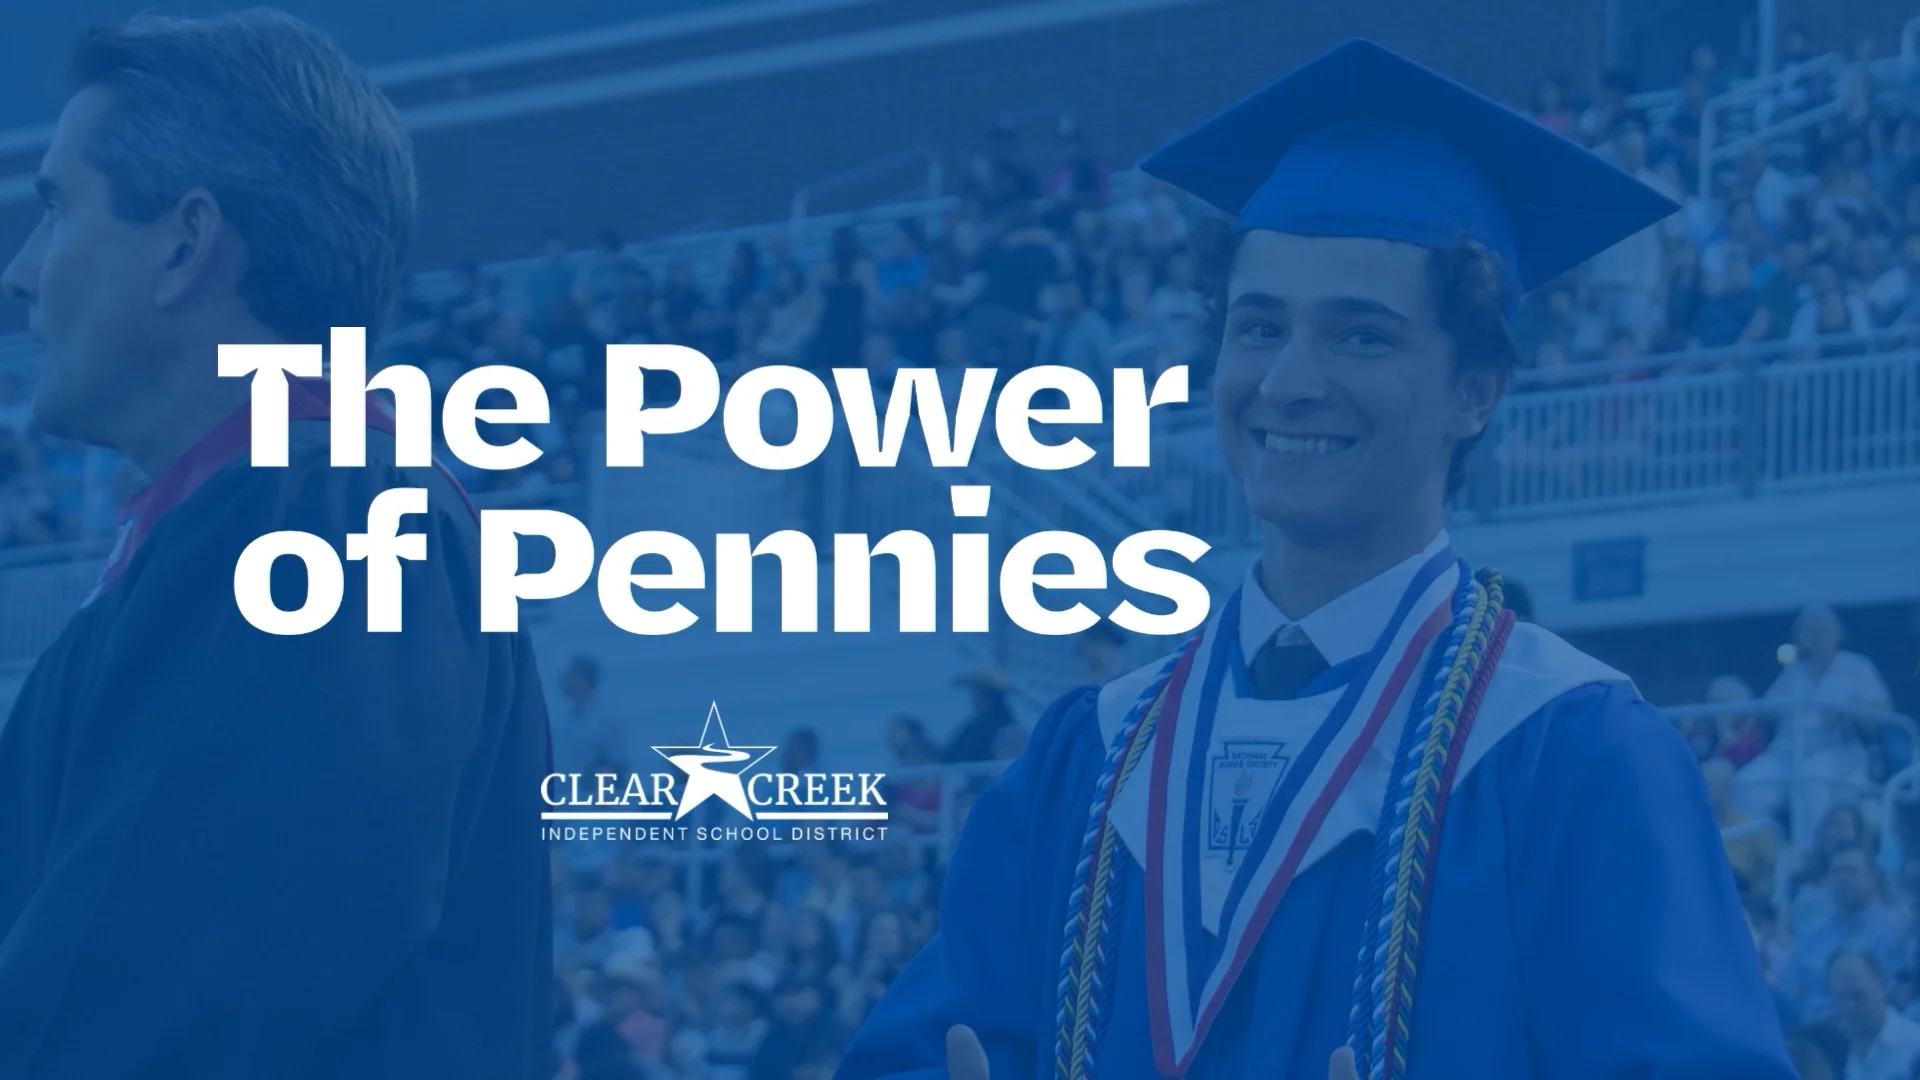 The Power of Pennies on Vimeo